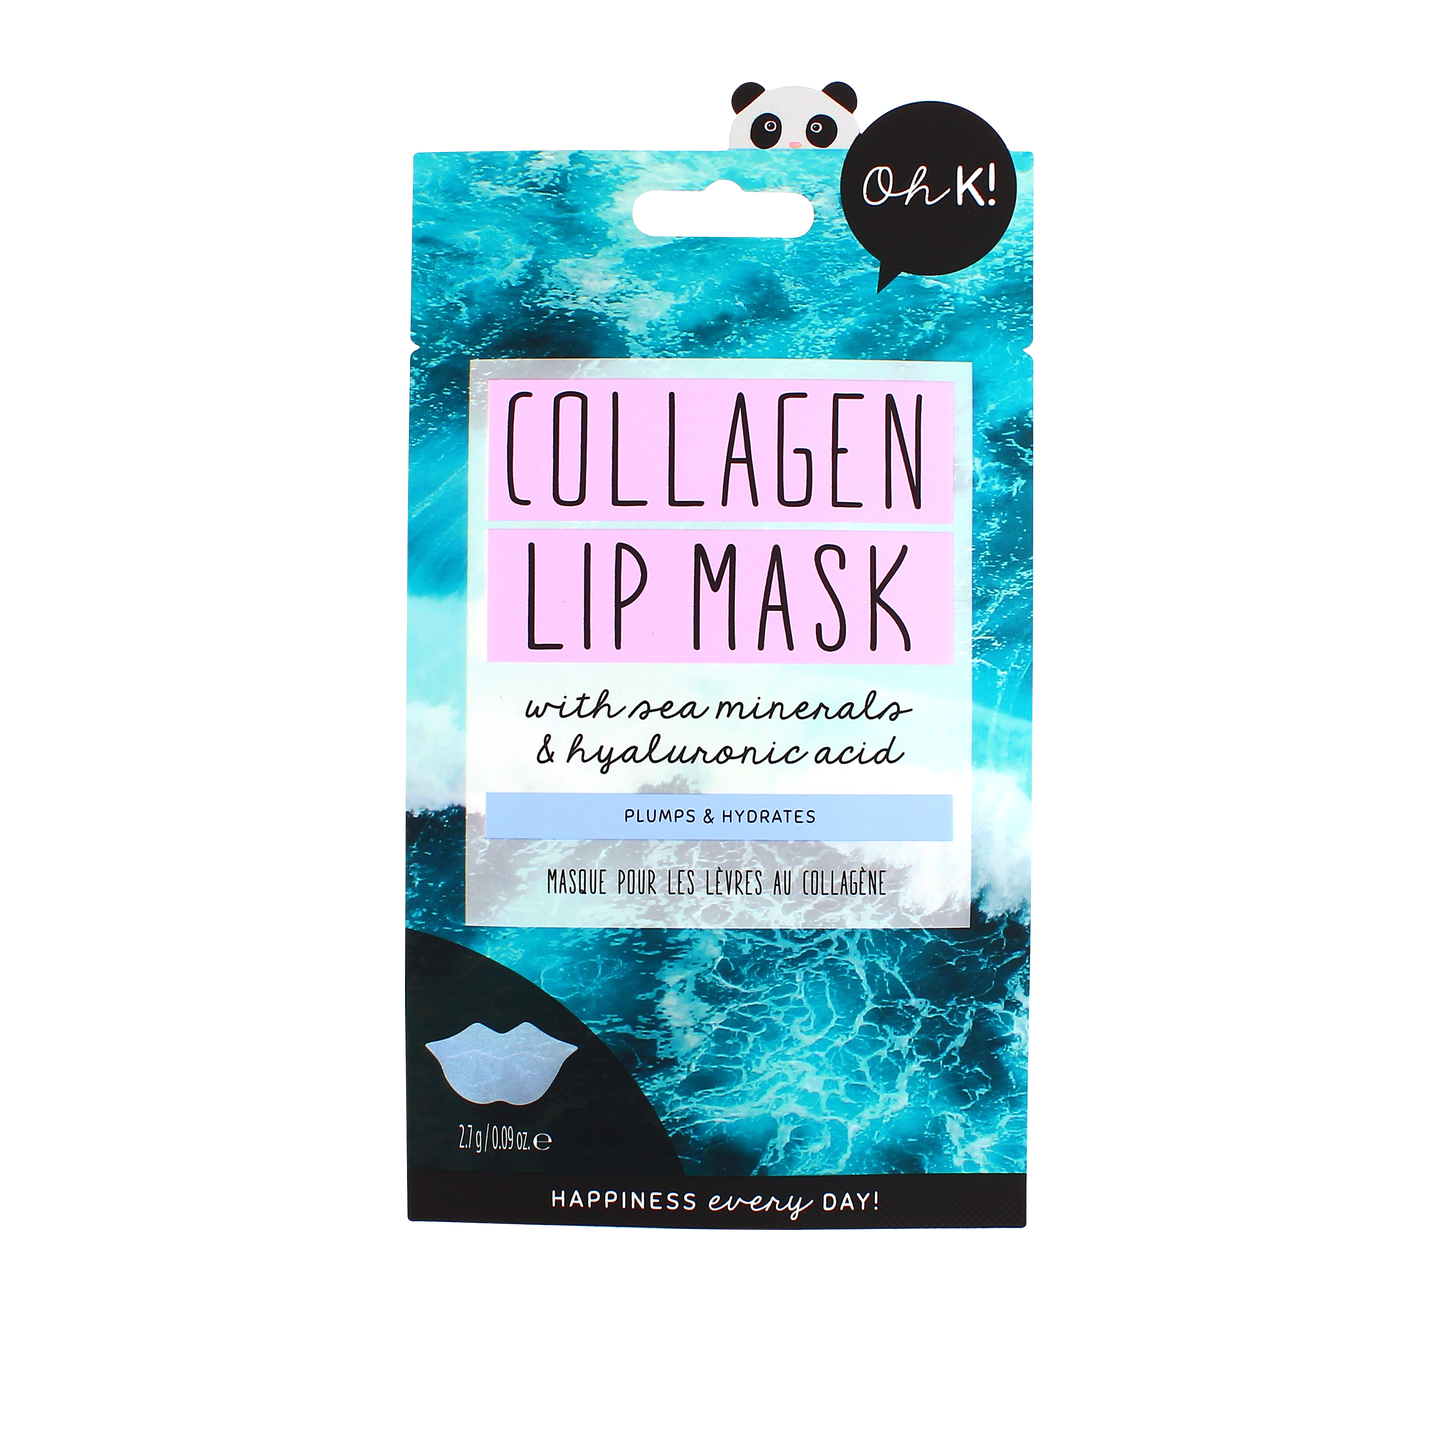 Oh K! Collagen Lip Mask - Plumps and Hydrates